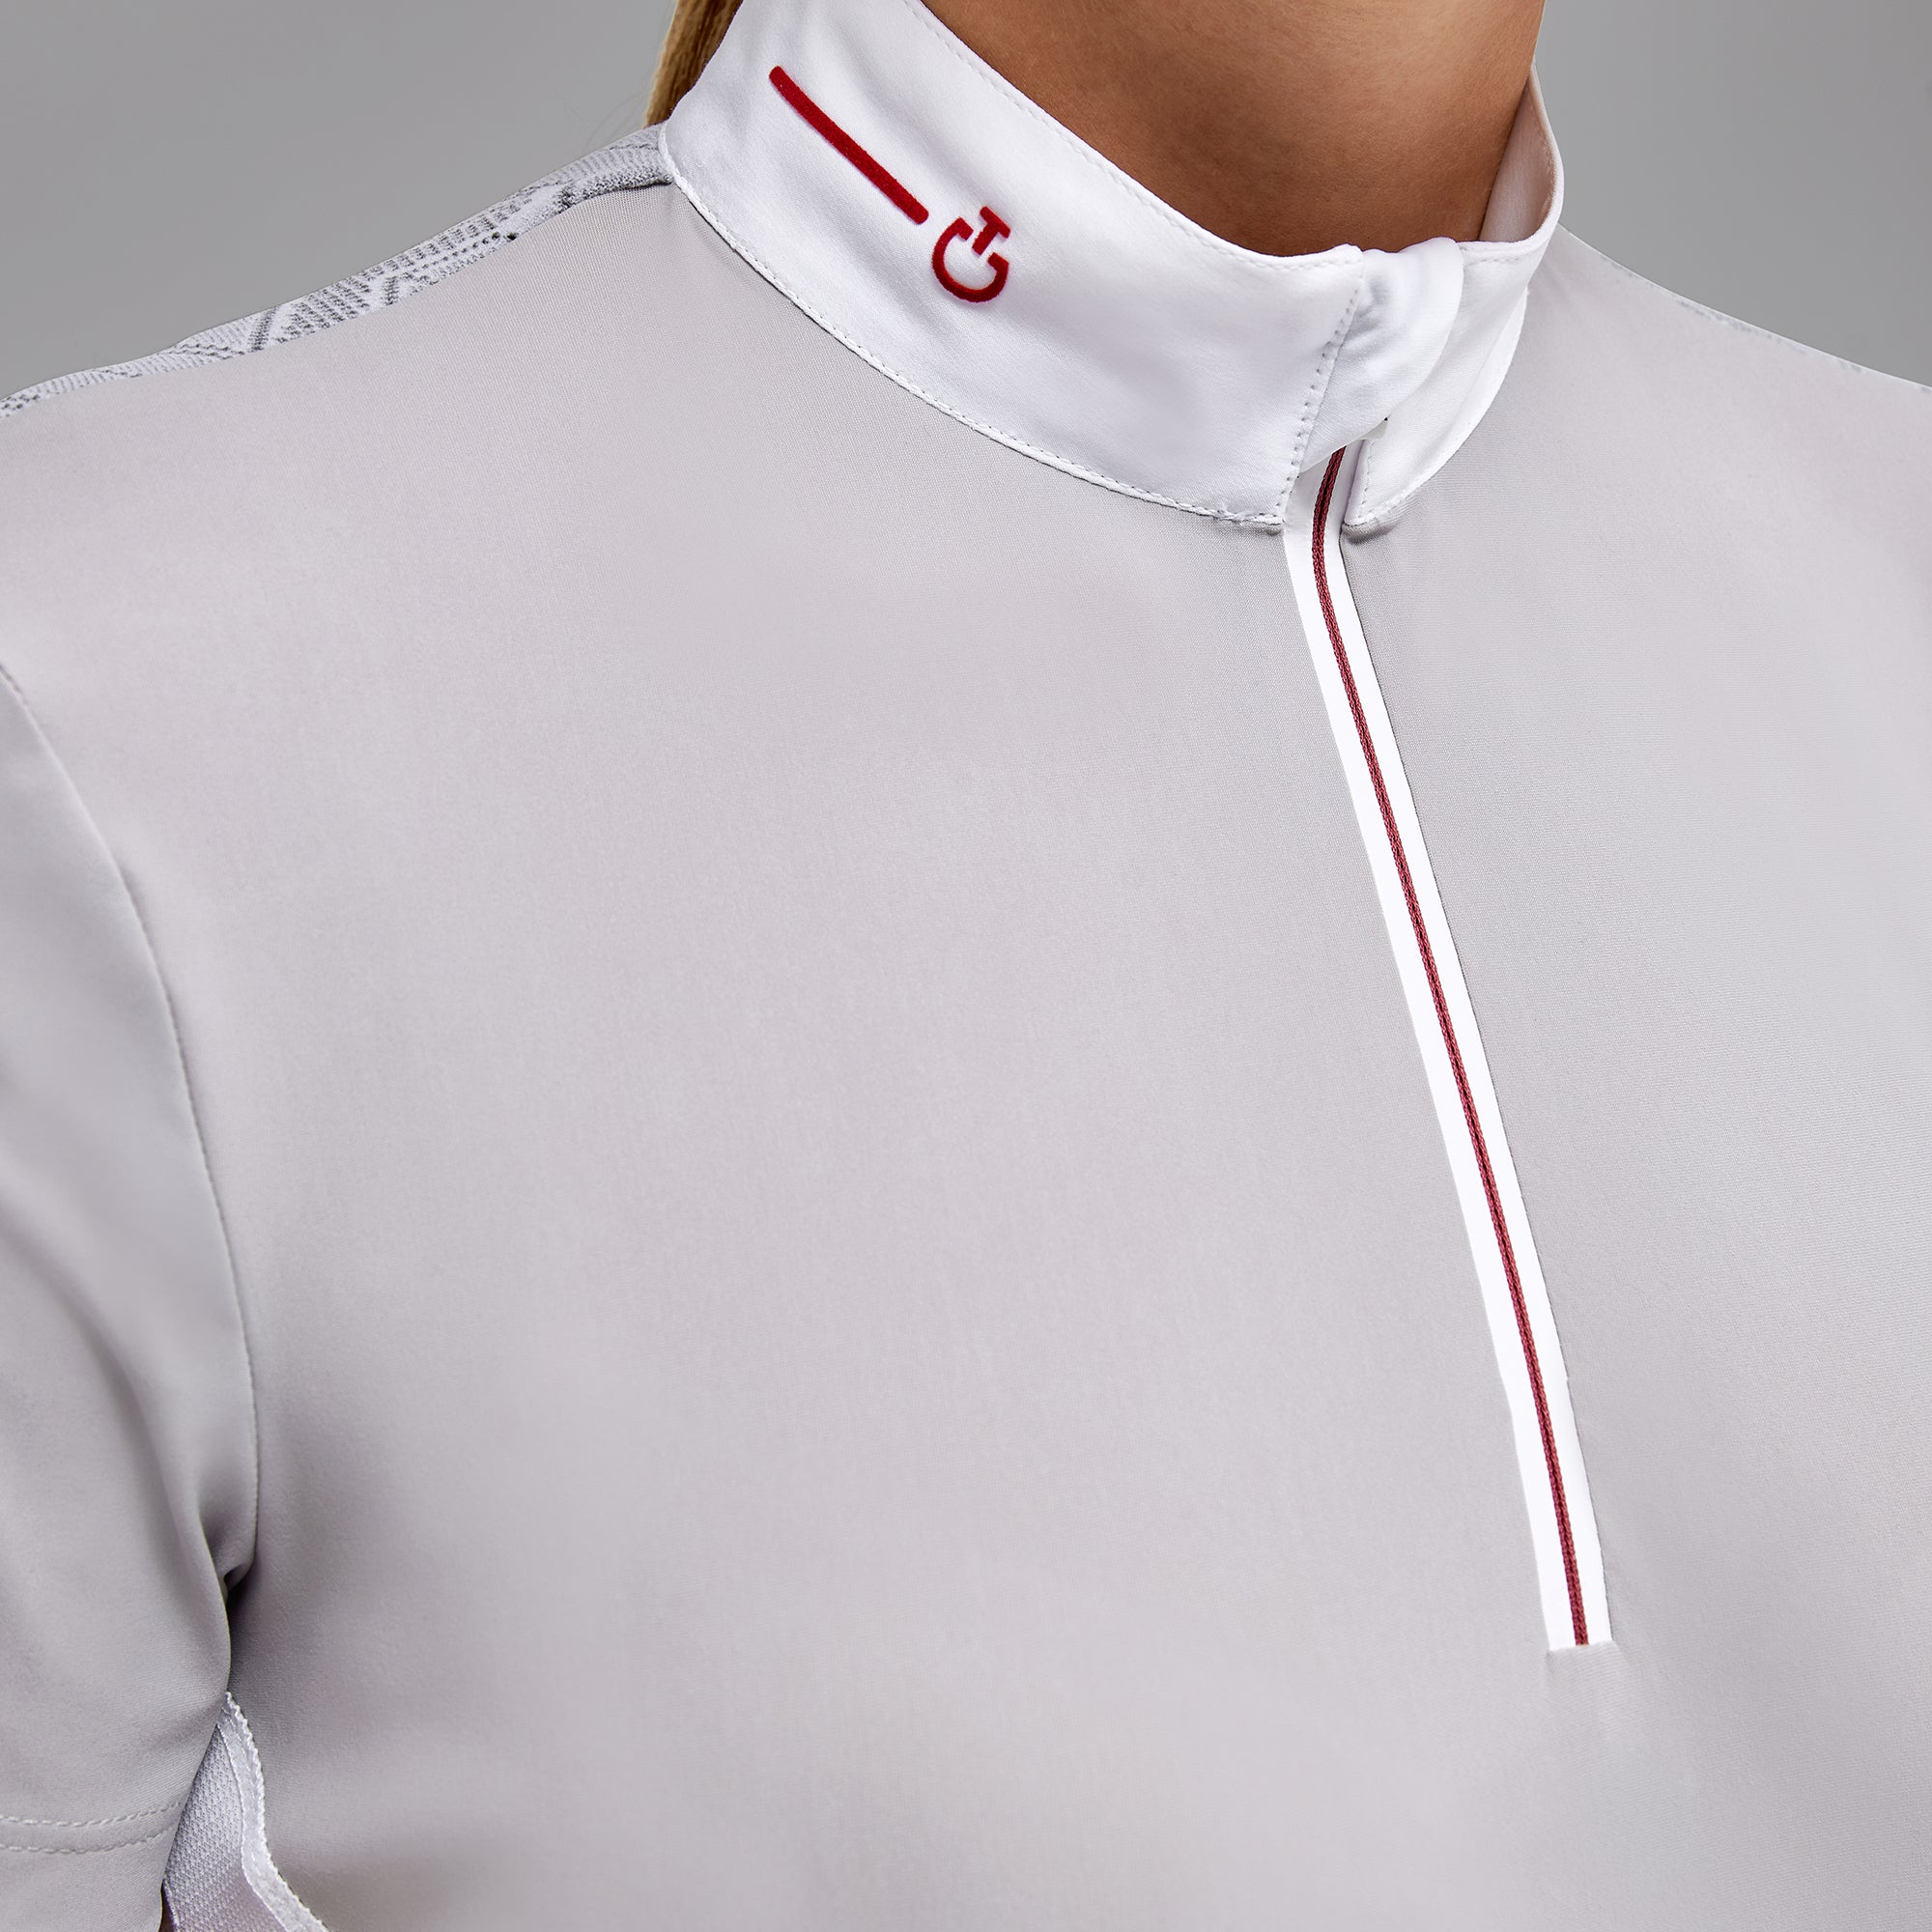 REVO JERSEY COMPETITION ZIP POLO